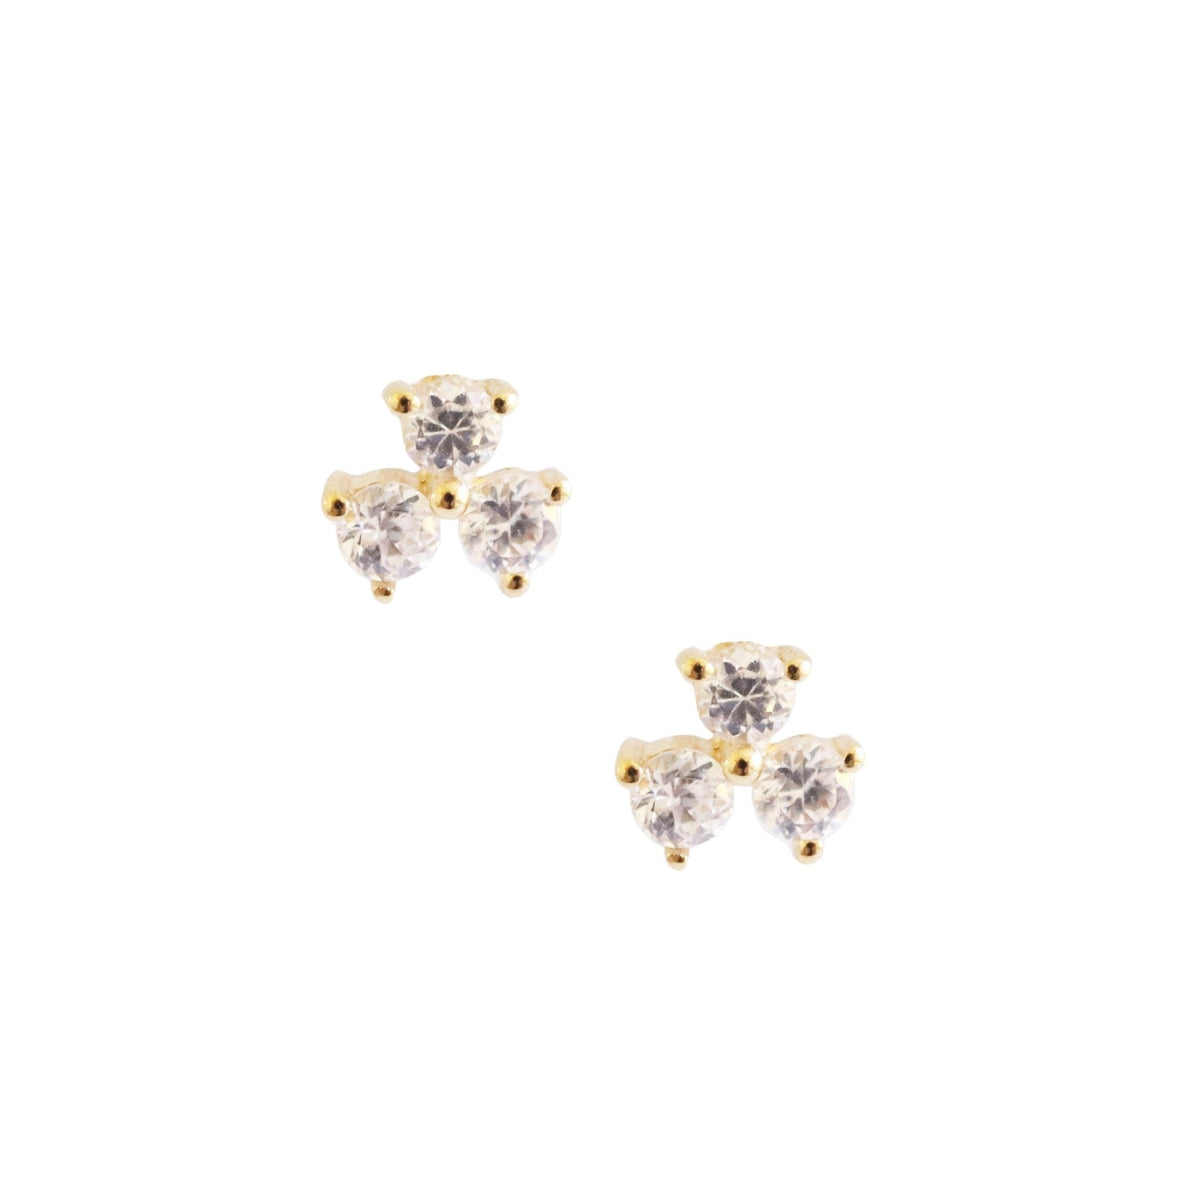 14K SOLID GOLD - TINY TRIO LOVE STUDS - CUBIC ZIRCONIA - SO PRETTY CARA COTTER